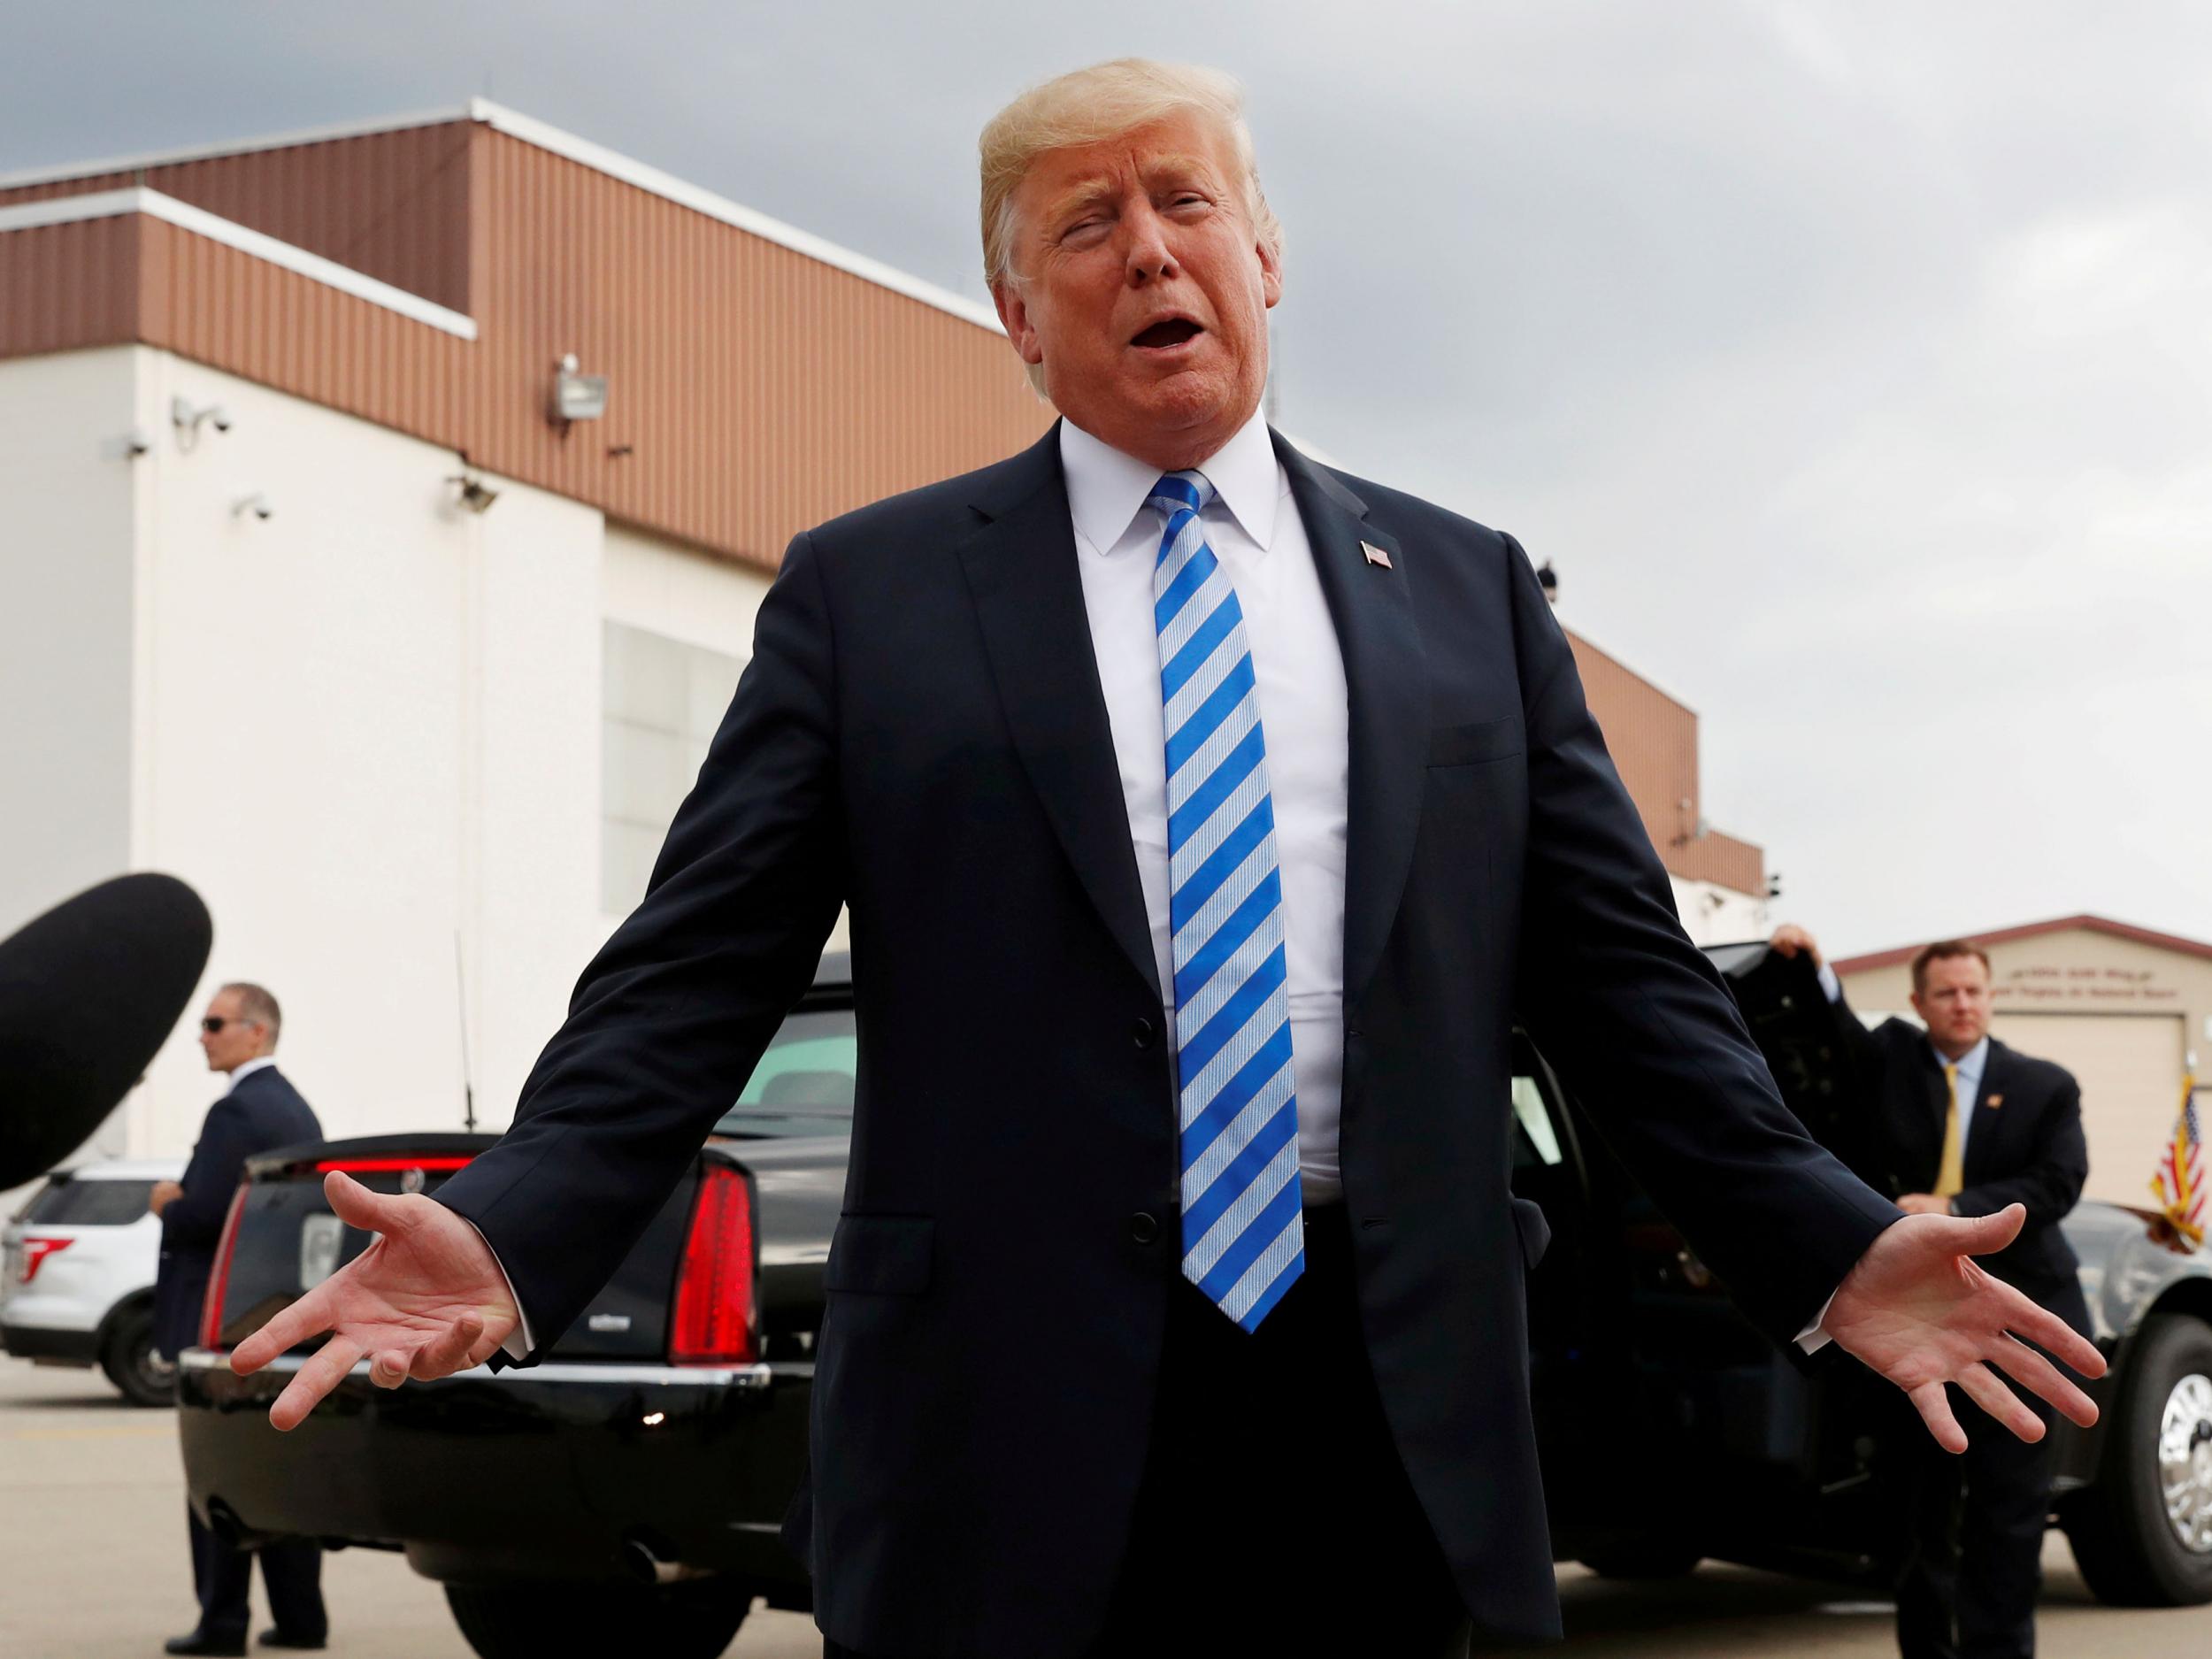 President Donald Trump speaks to the news media about the federal conviction of his former presidential campaign chairman Paul Manafort as he arrives for a campaign event in Charleston on 21 August 2018 (Leah Millis/Reuters)